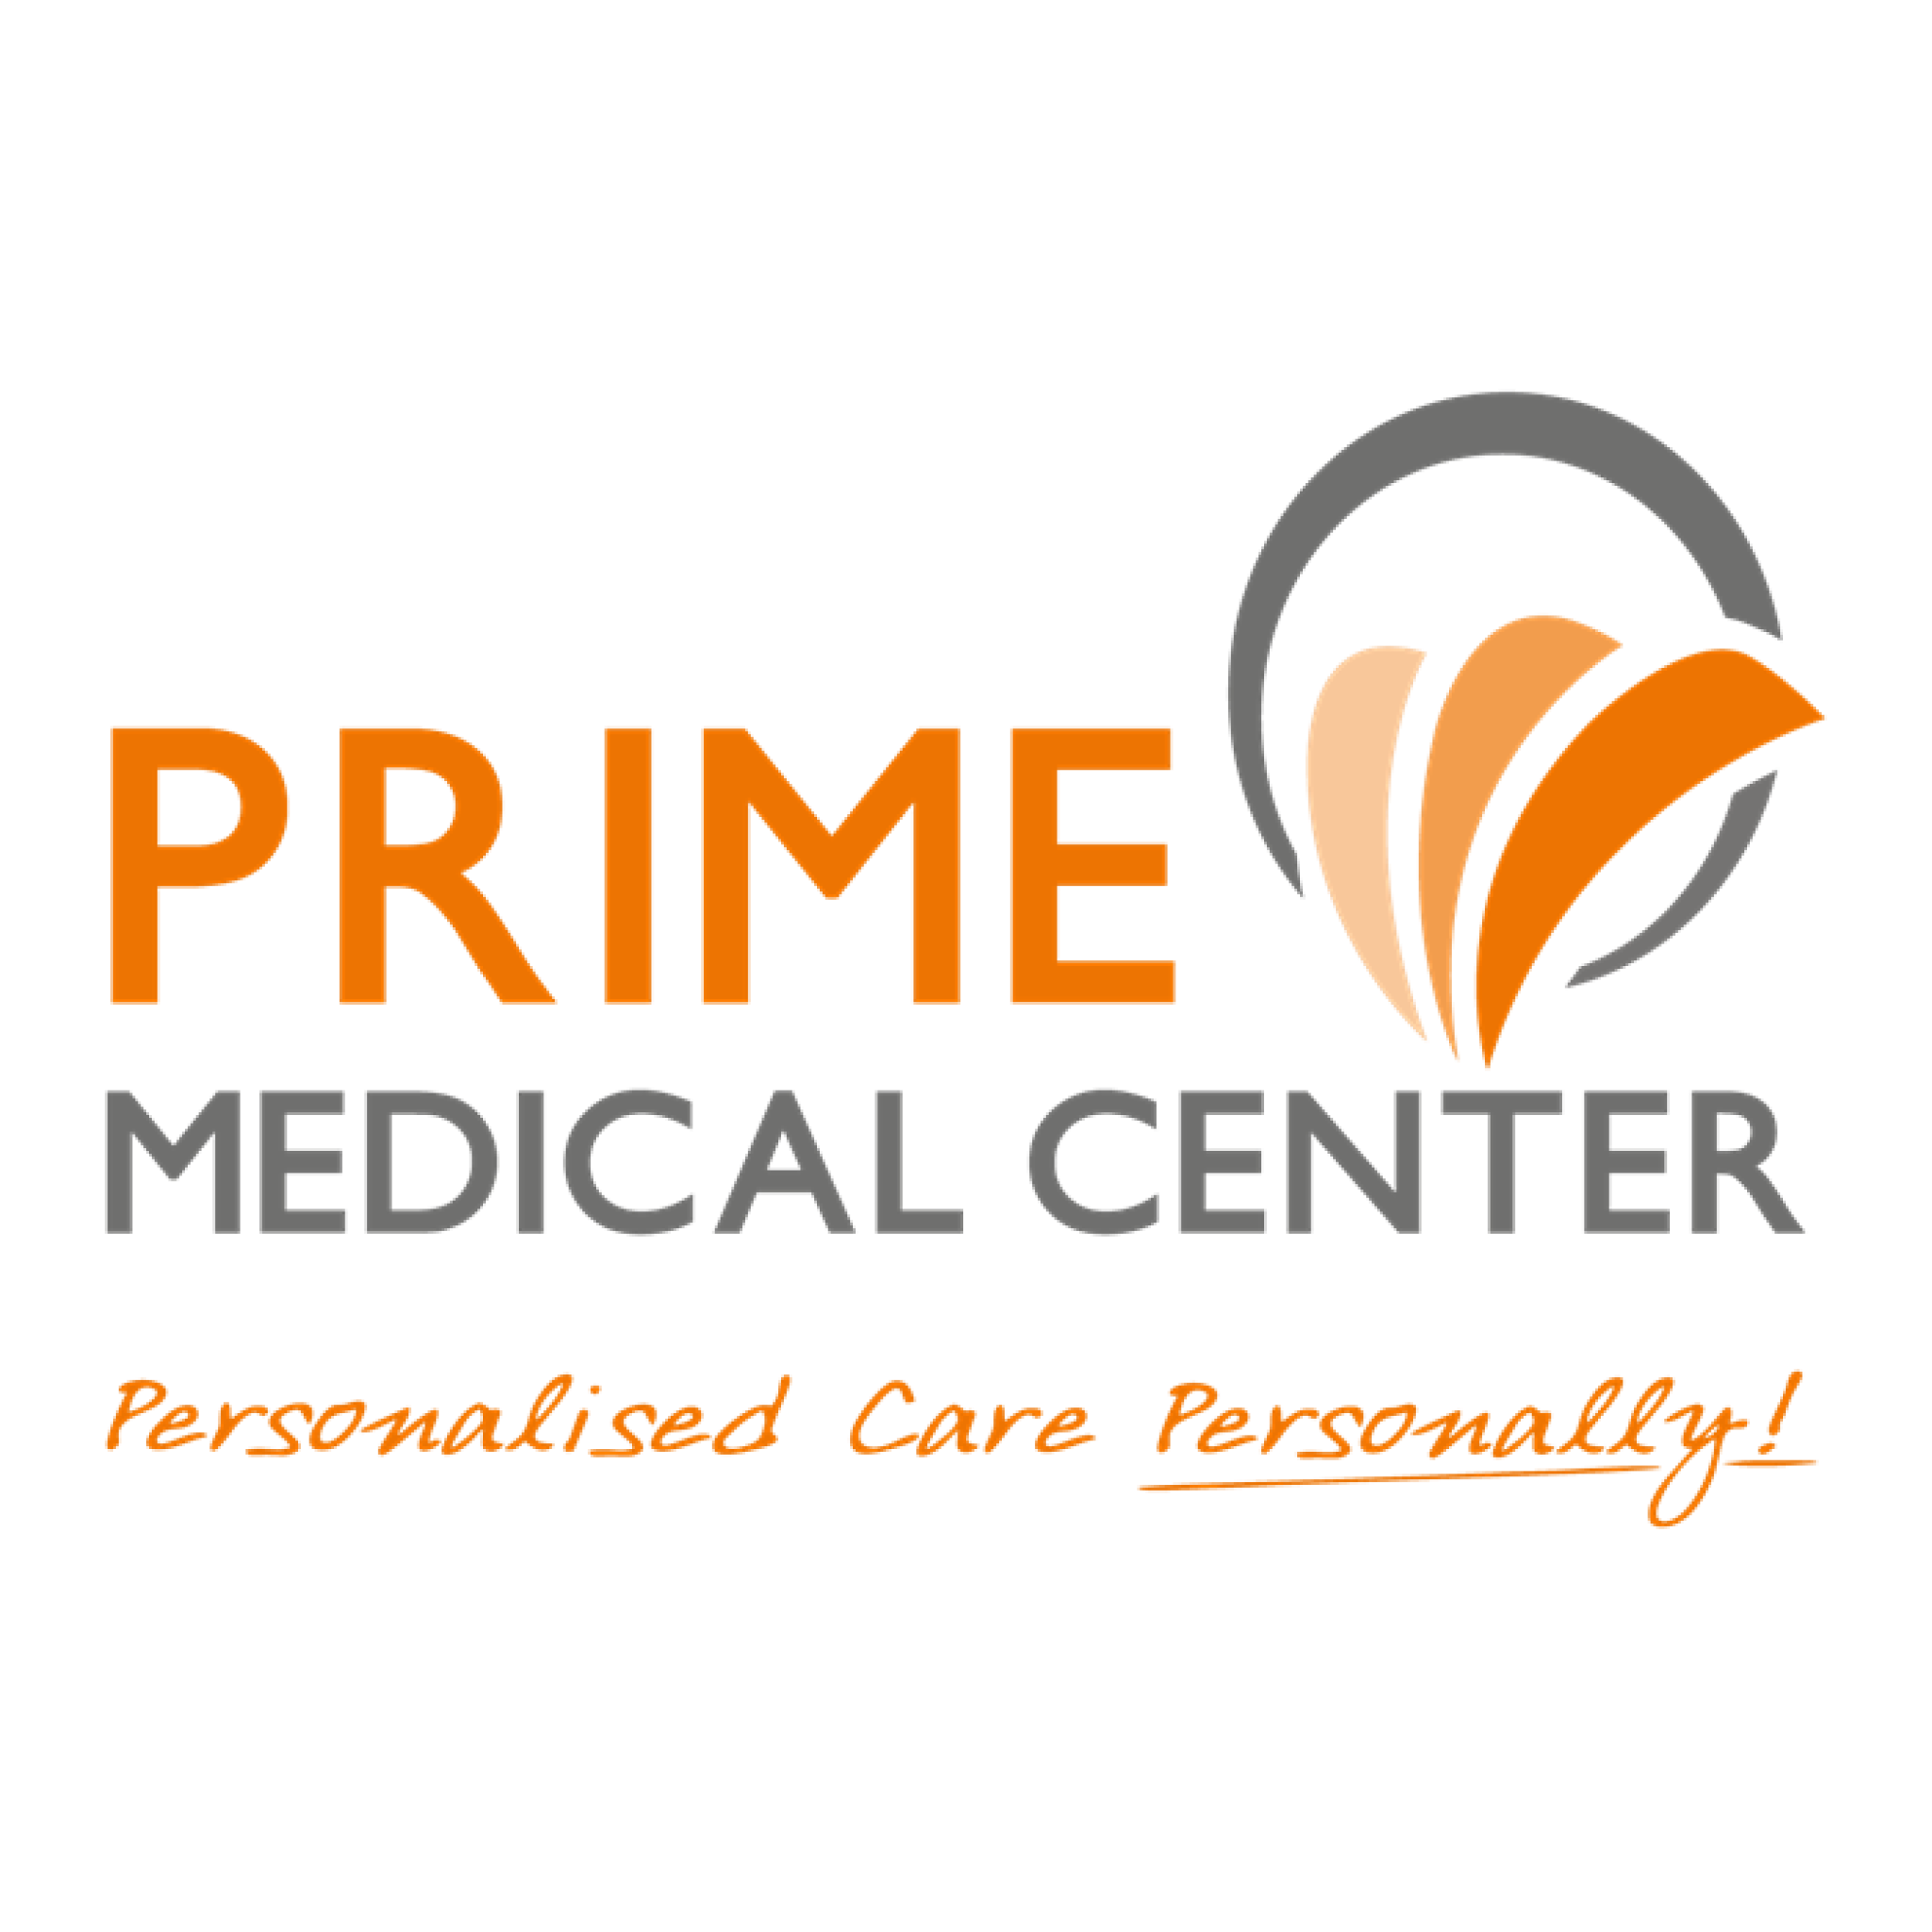 Prime Medical Center - Reef Mall